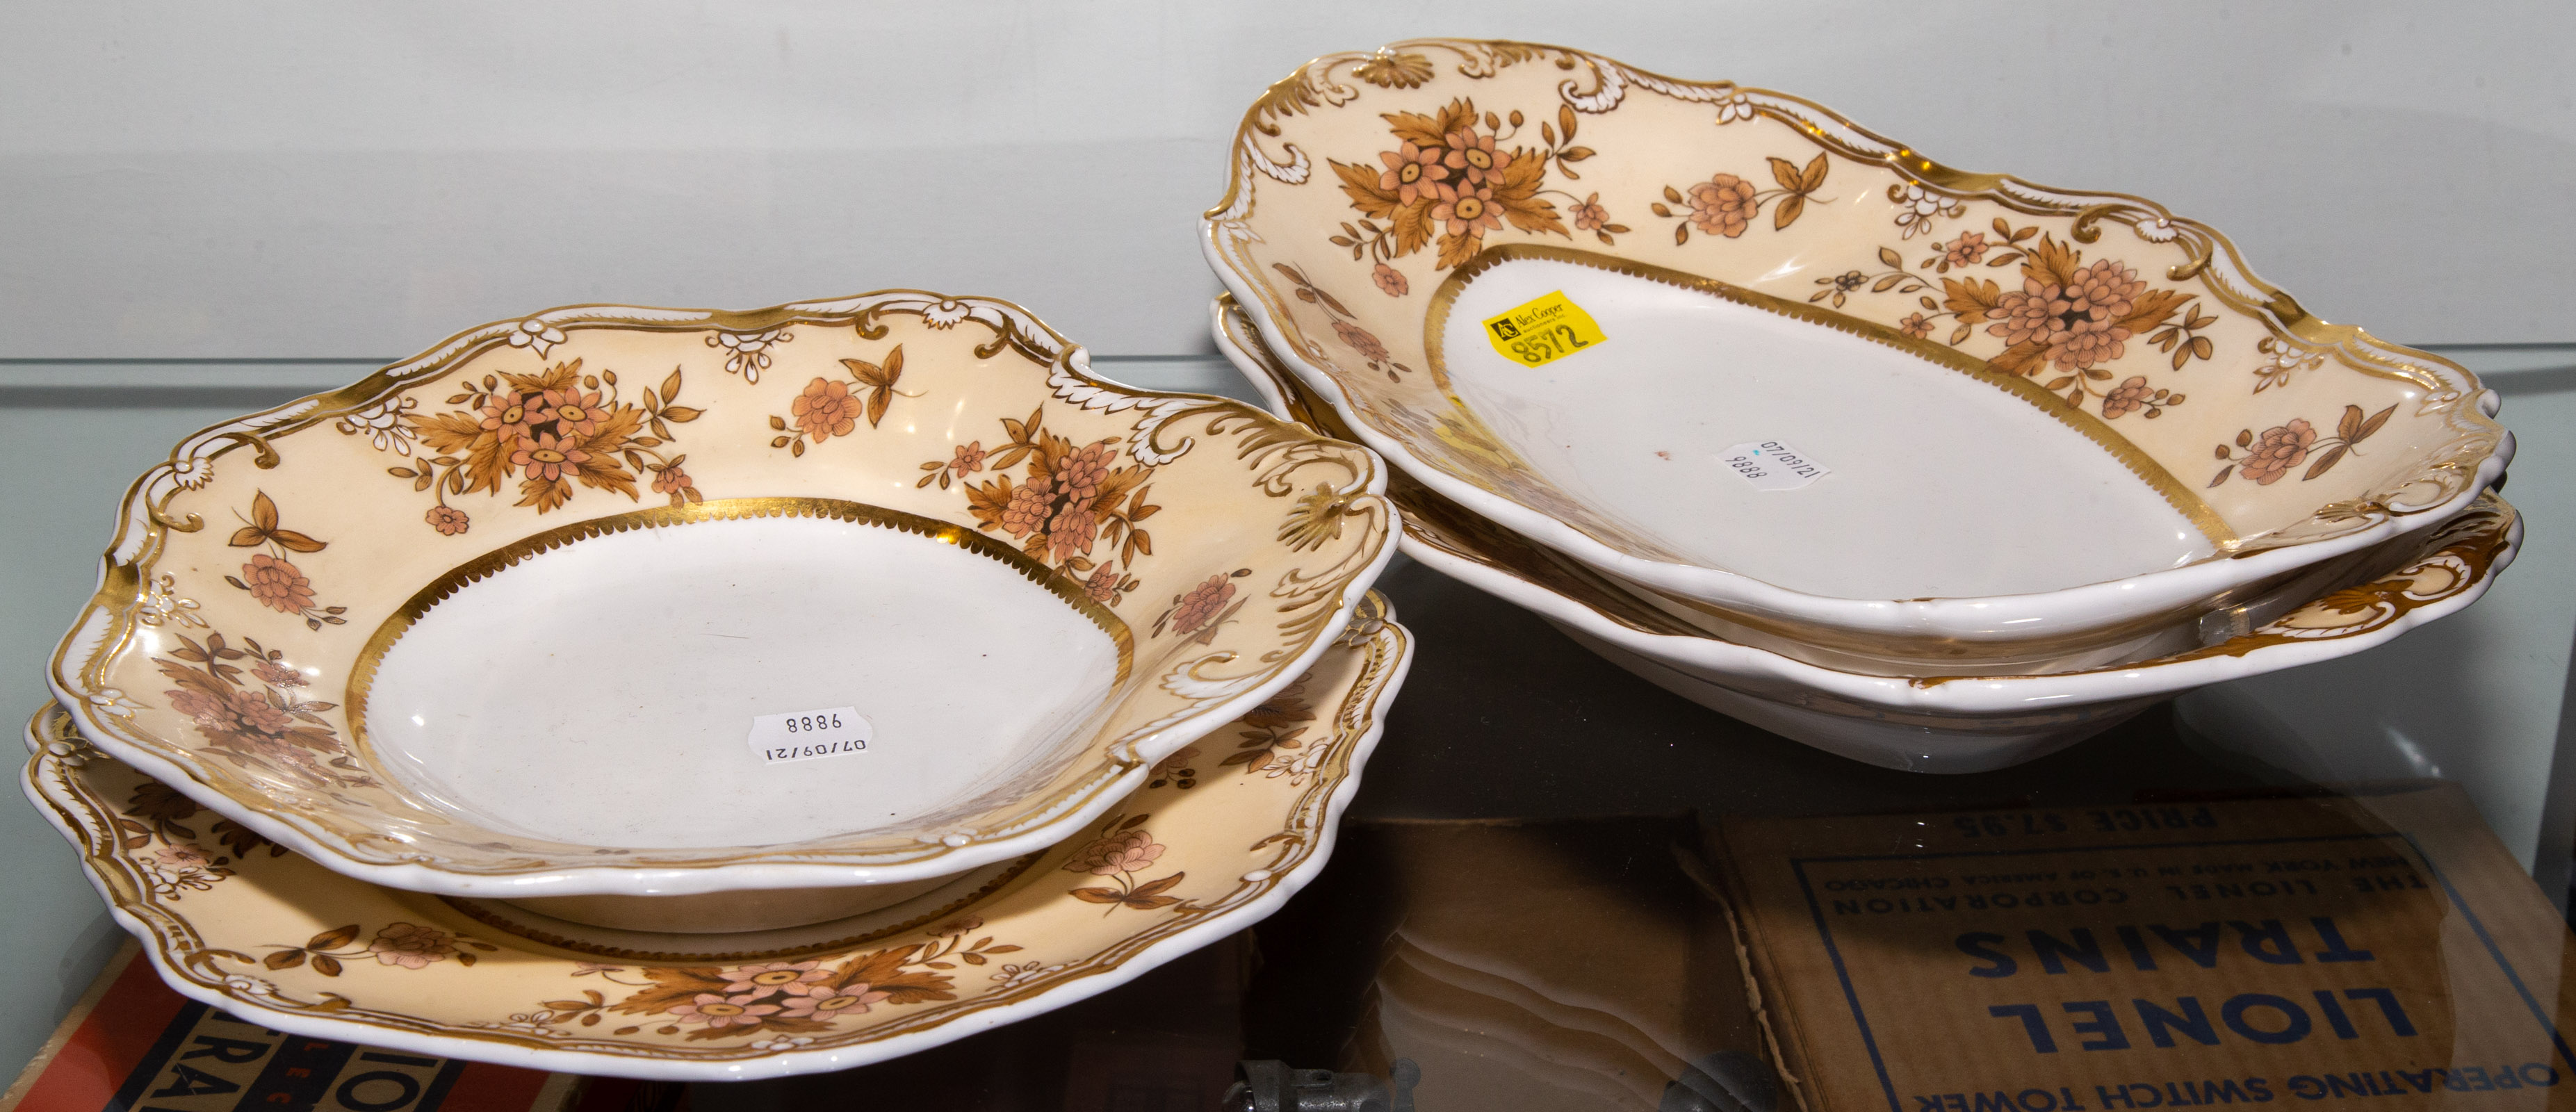 FOUR SPODE CHINA SERVING DISHES 333f8f